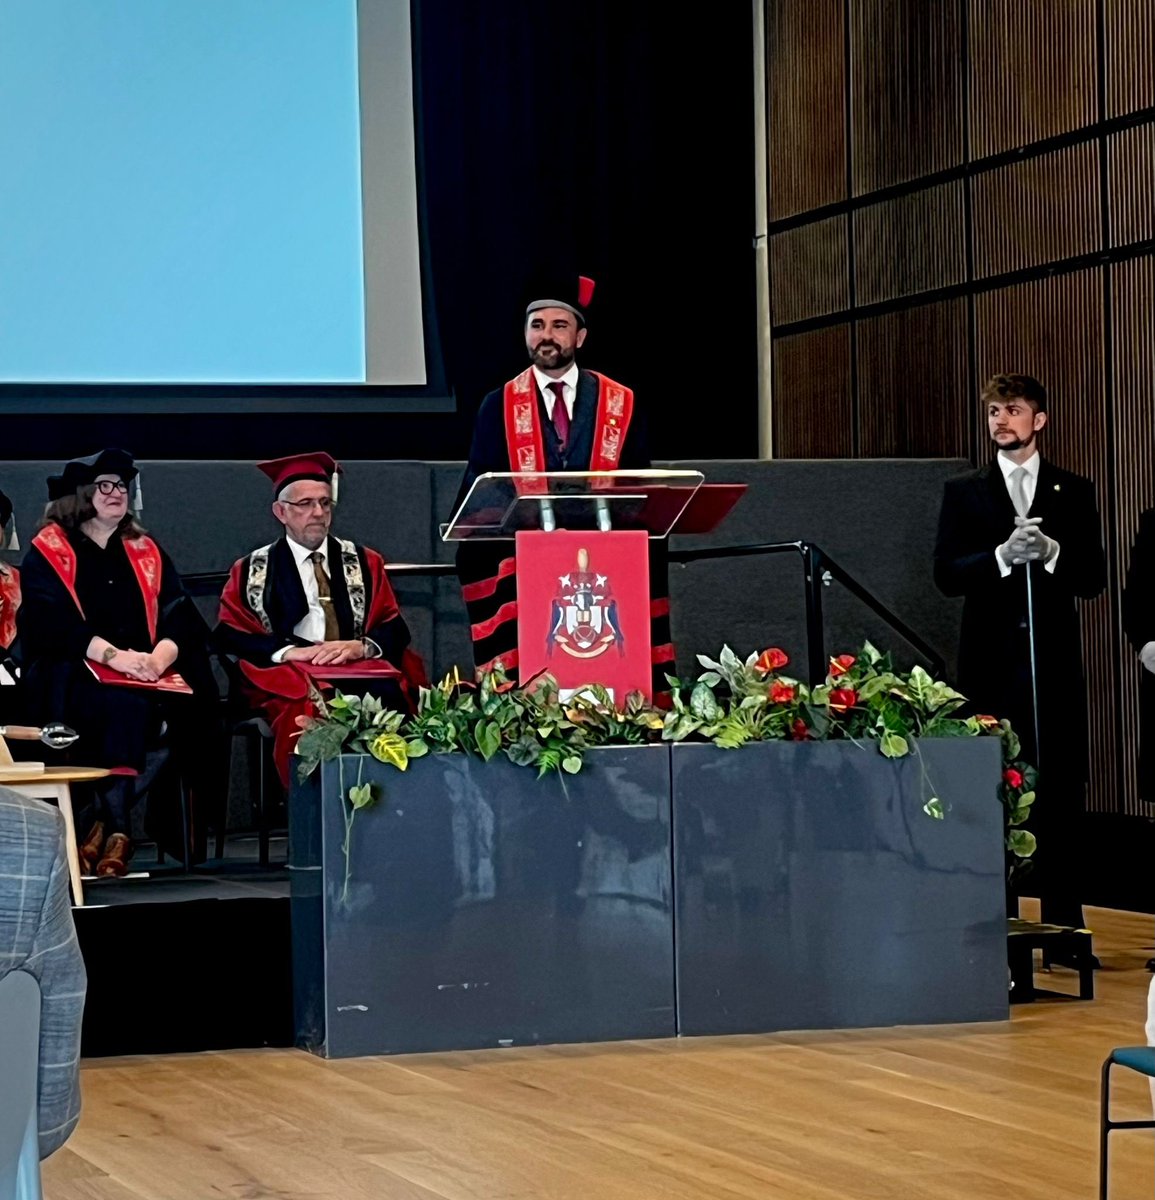 What a special day on campus as Lord Stafford passed on the Chancellor's robe to Major Levison Wood! 🎓 Let's continue to explore and educate as global citizens together! ✨ #Chancellor #Education #Exploration #ProudToBeStaffs